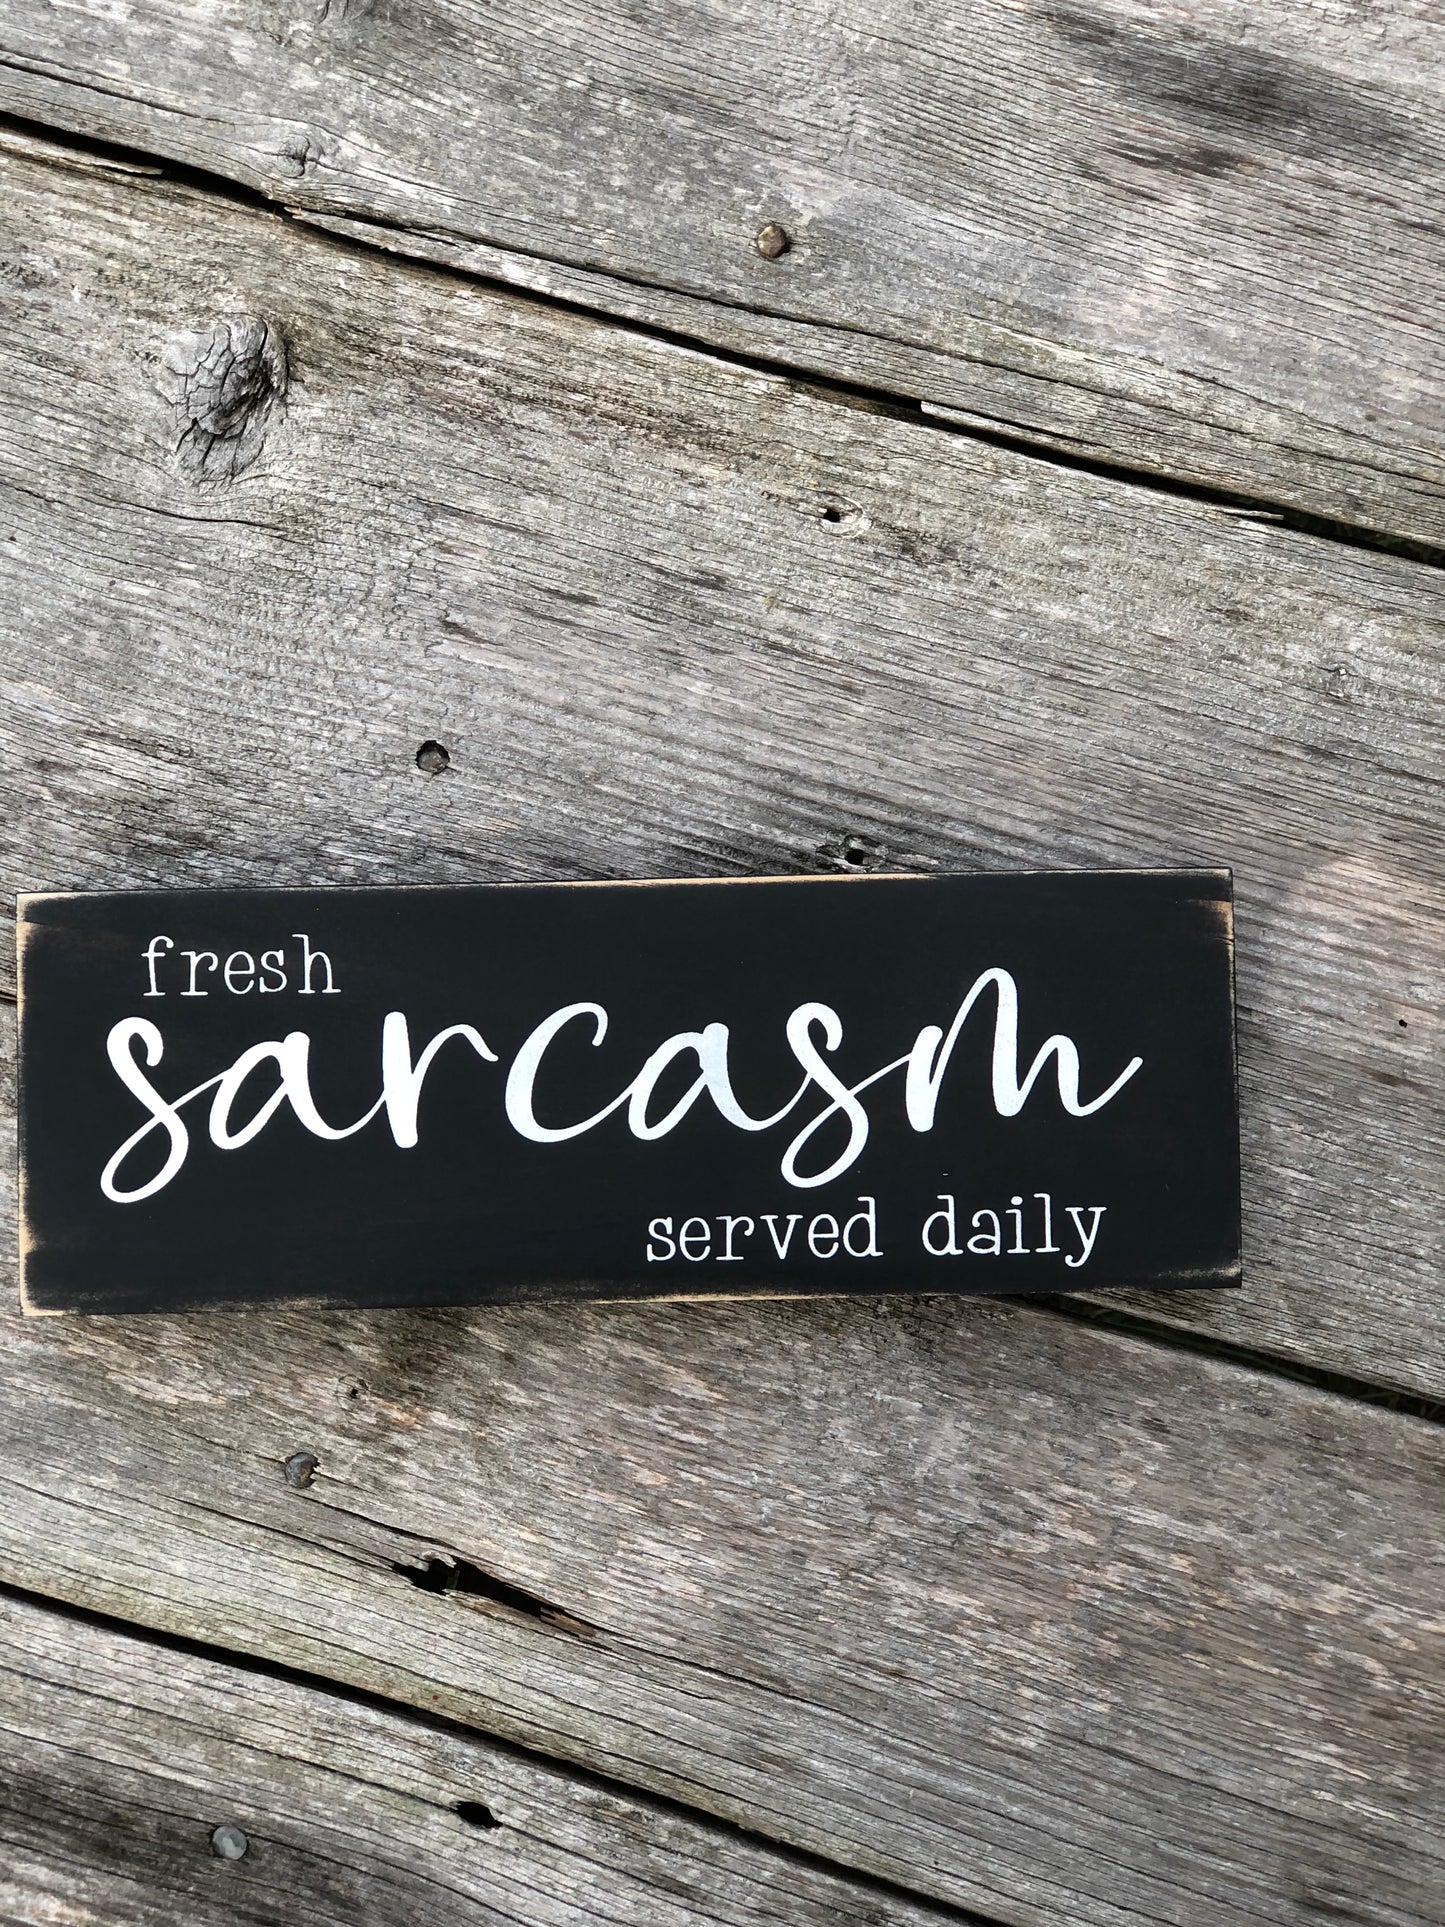 FRESH SARCASM SERVED DAILY- WOOD SIGN